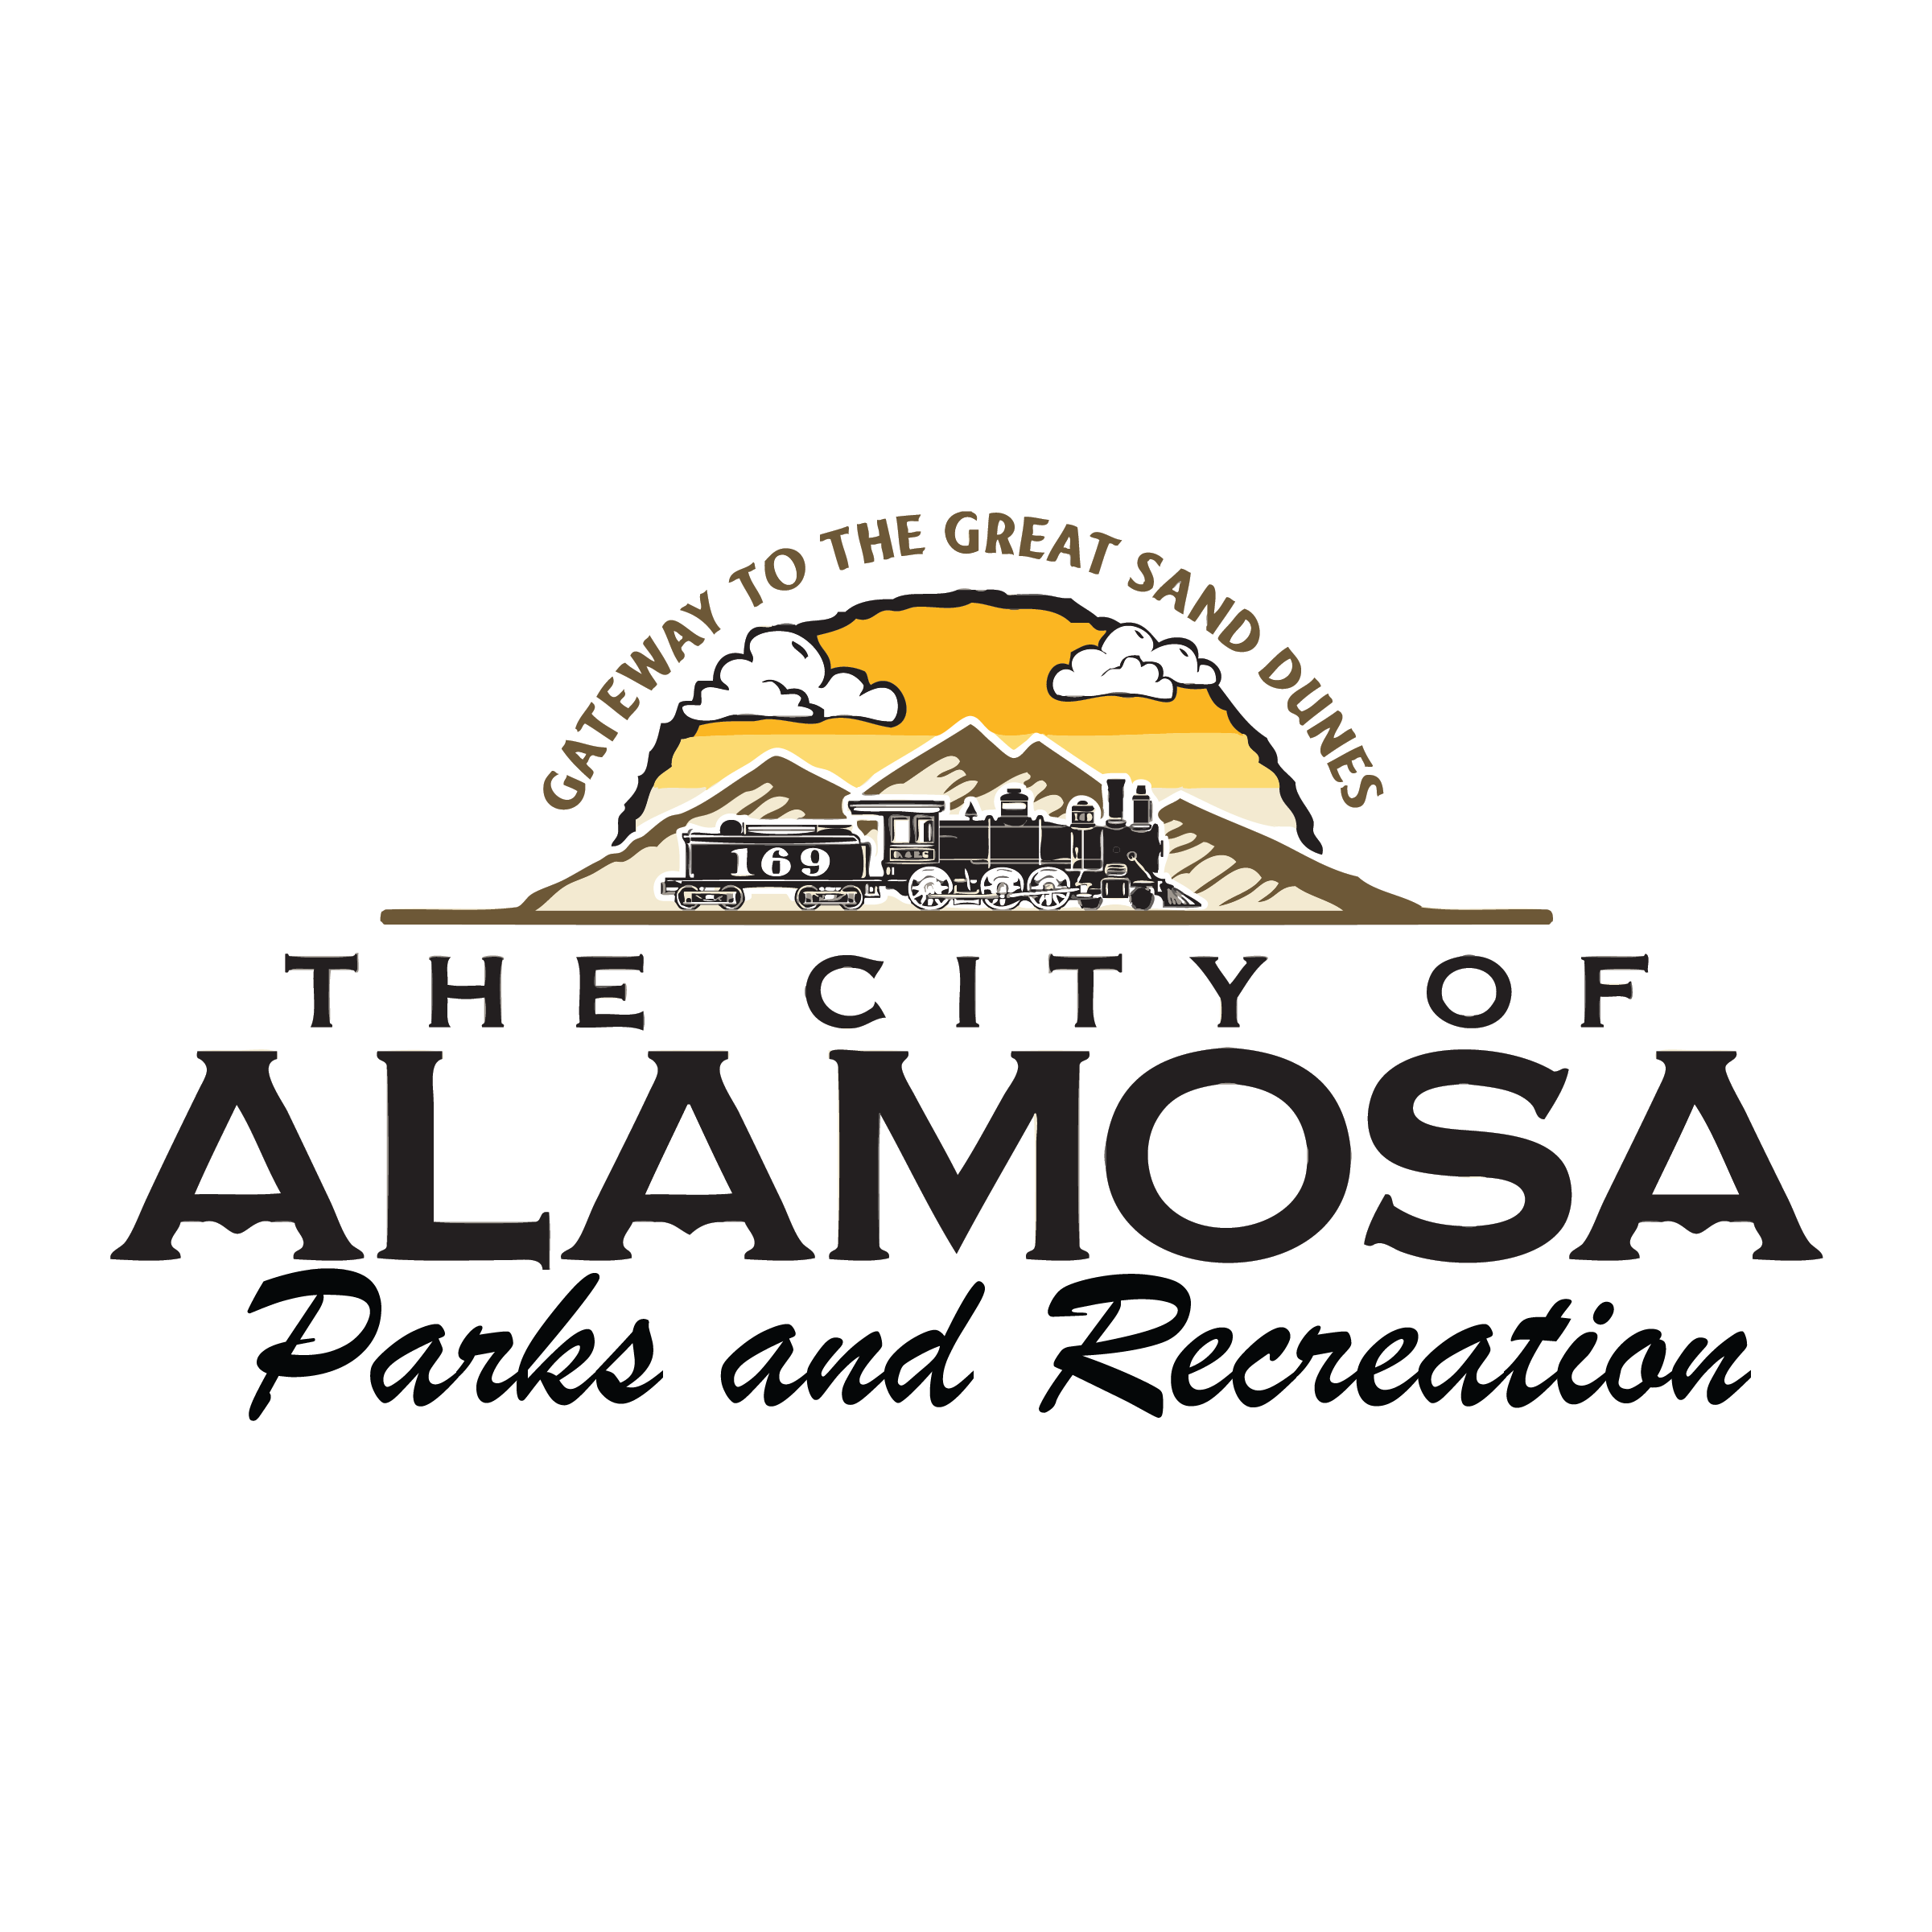 Alamosa Parks and Recreation